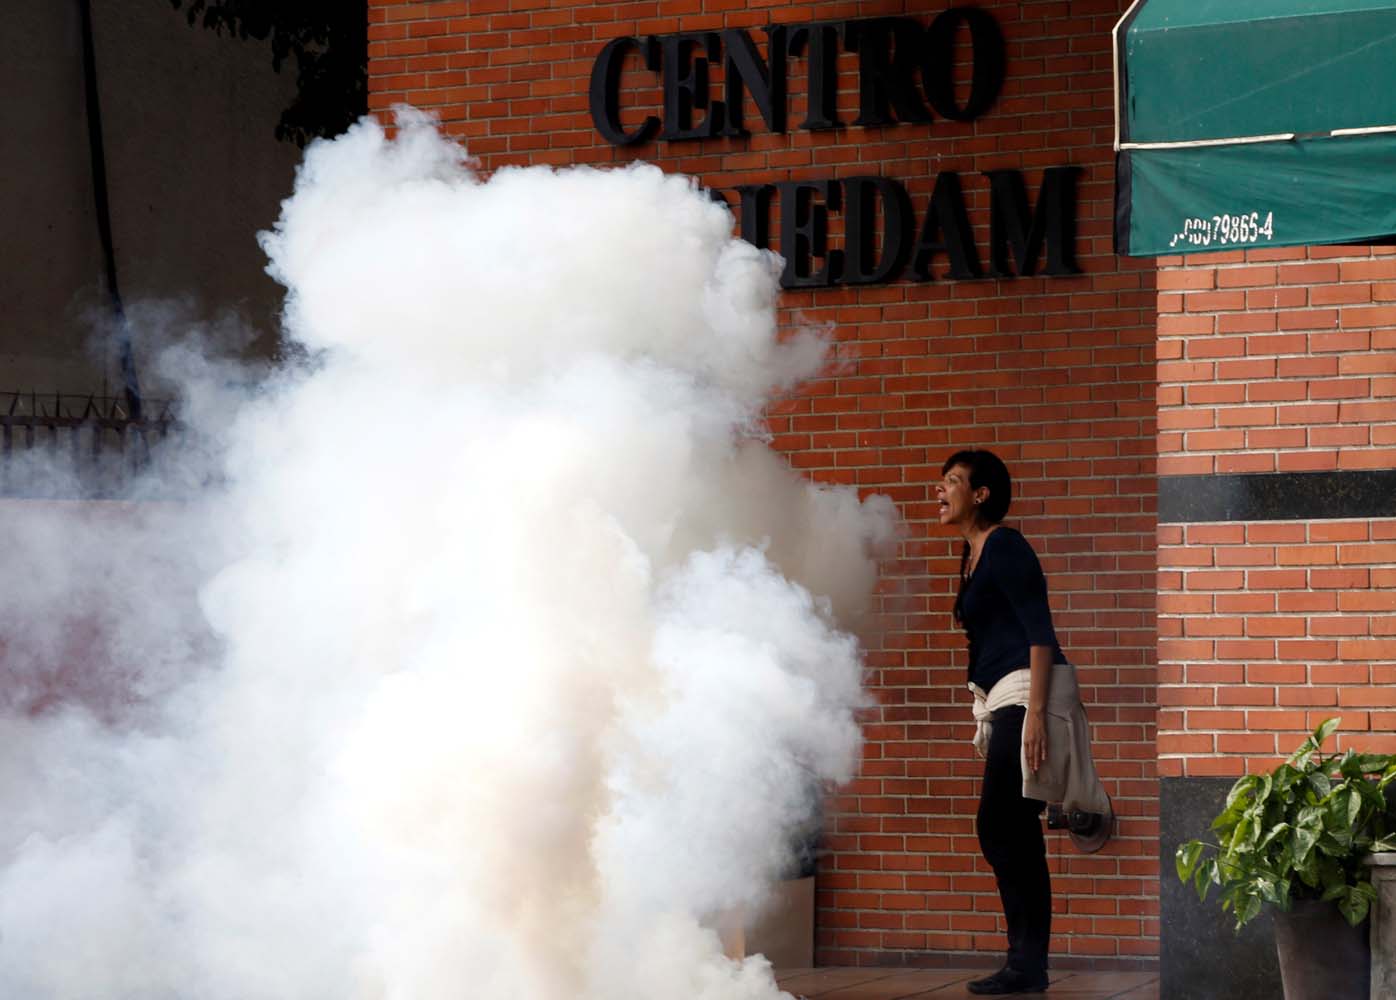 A woman reacts outside a restaurant after tear gas was fired by security forces during clashes at a rally against Venezuelan President Nicolas Maduro's government in Caracas, Venezuela, July 6, 2017. REUTERS/Andres Martinez Casares